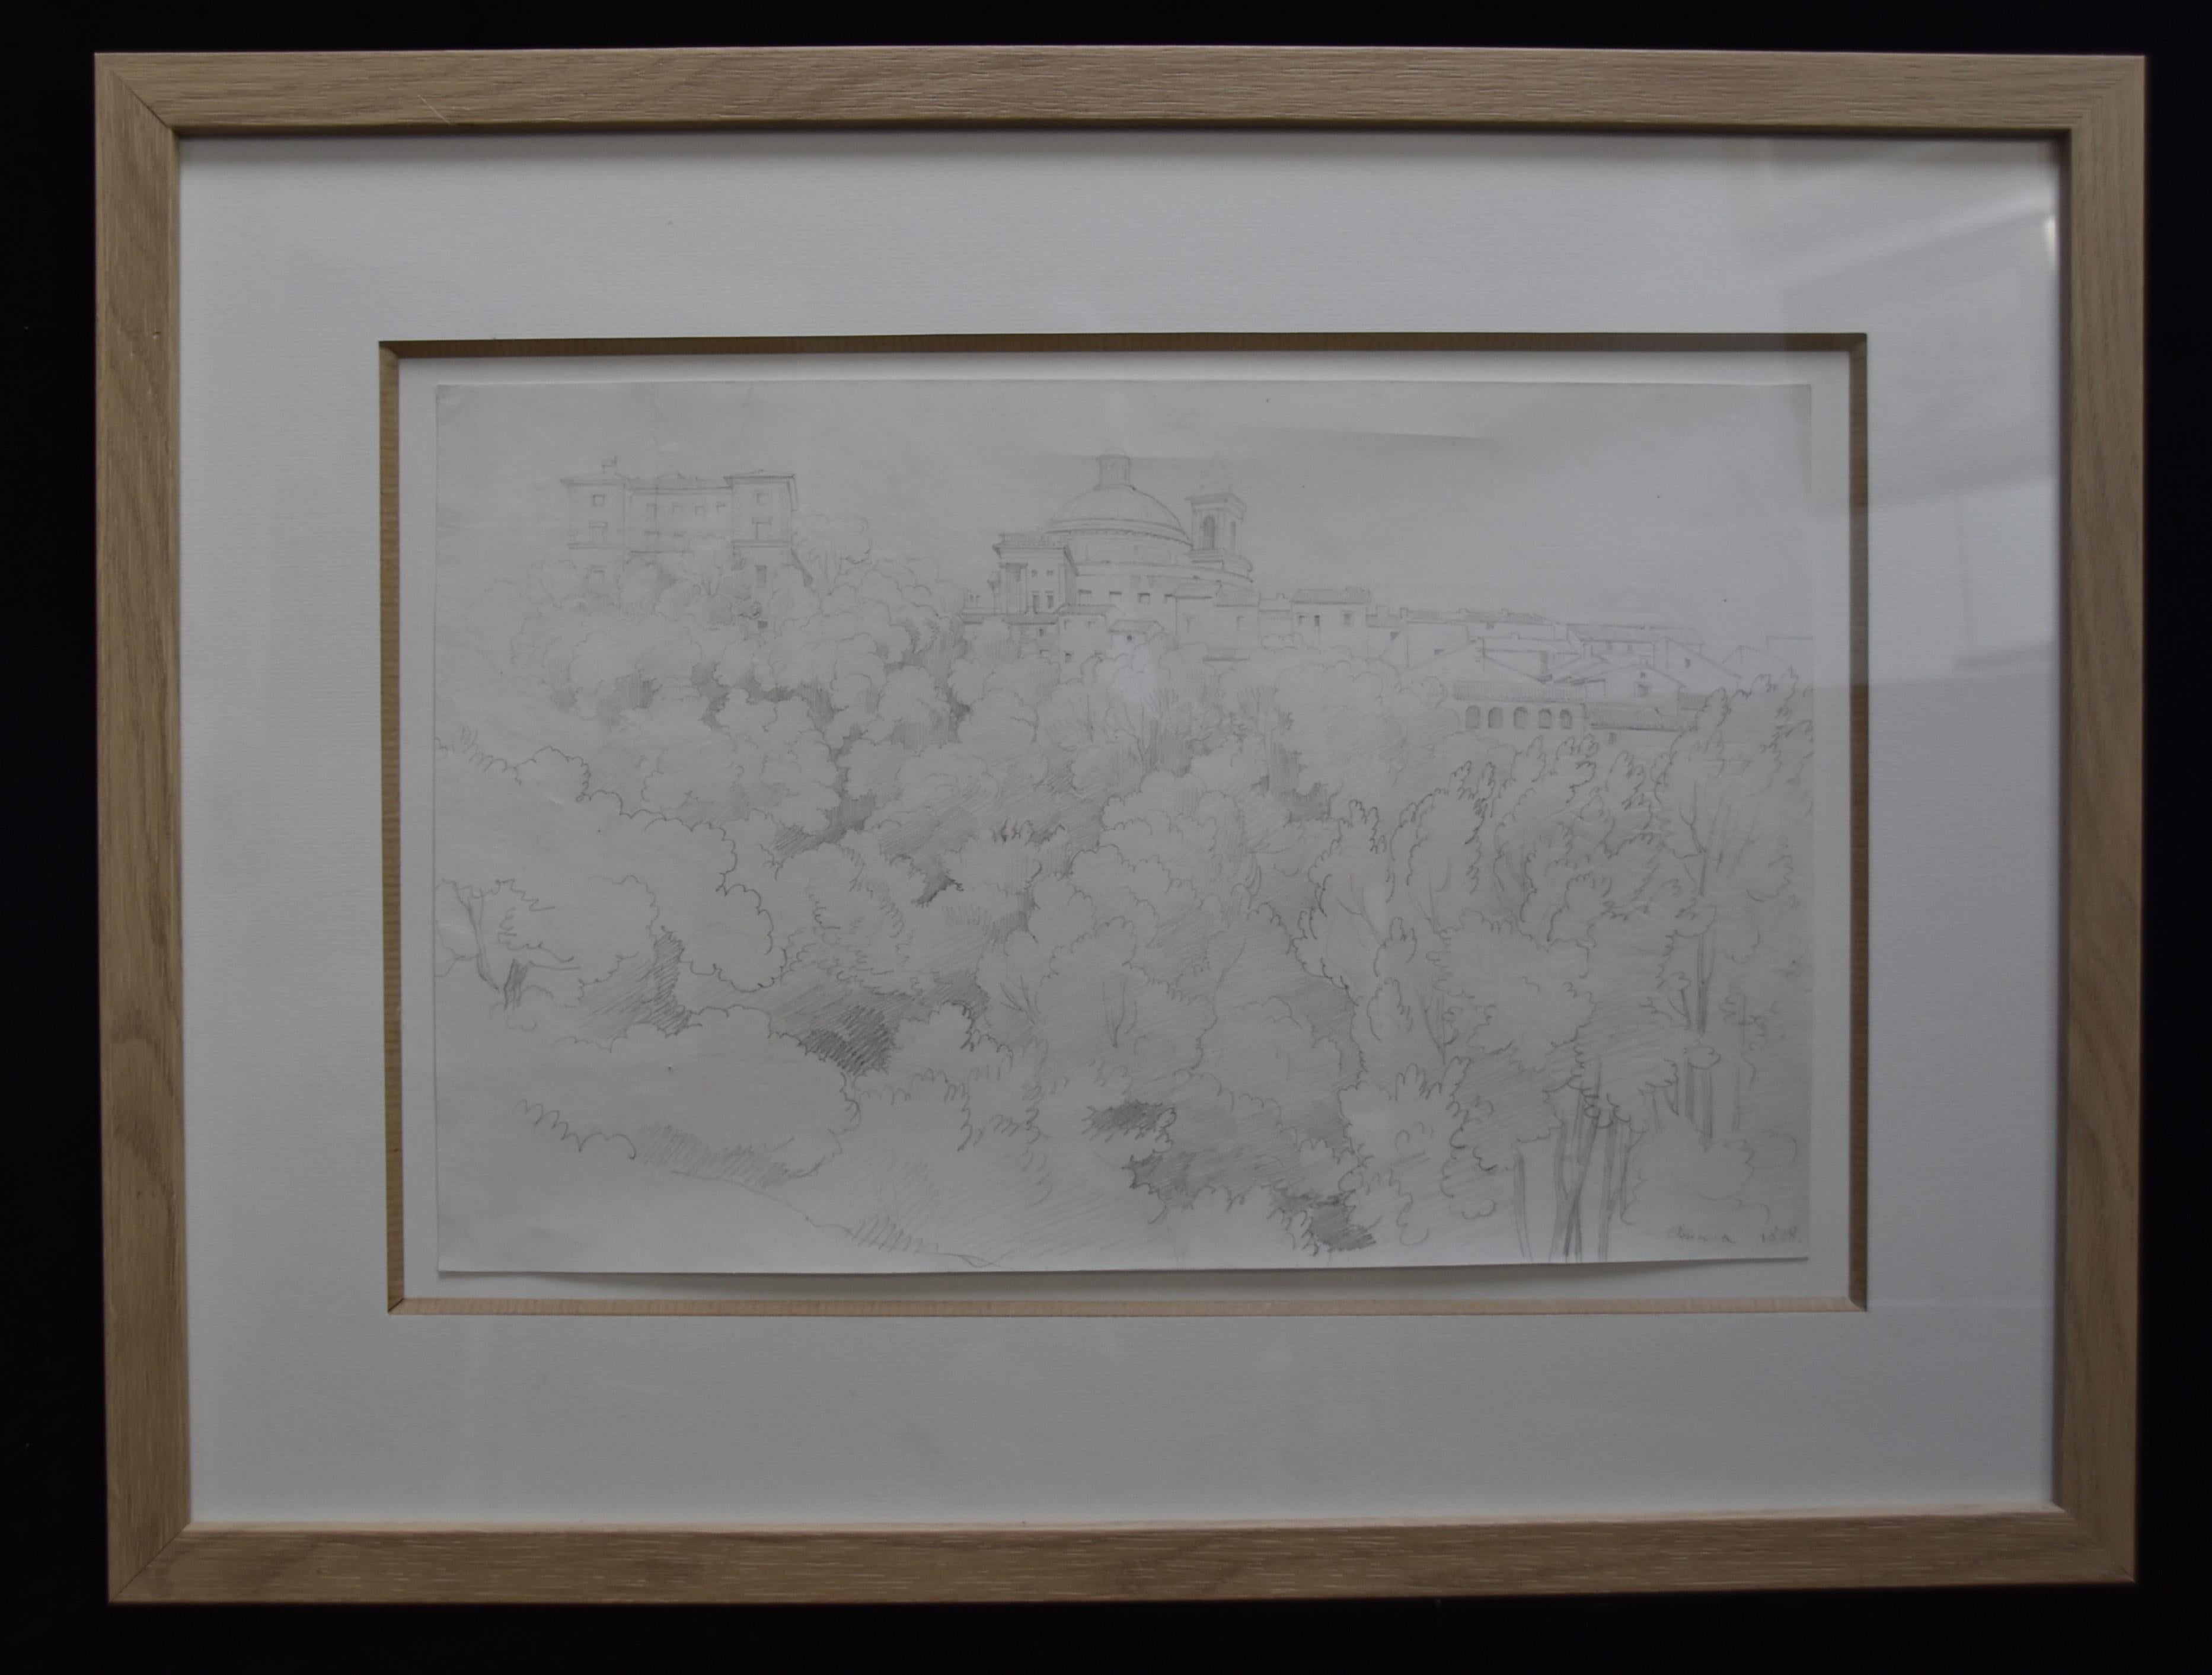 French Romantic School, View of Arriccia, 1828, drawing - Art by Unknown